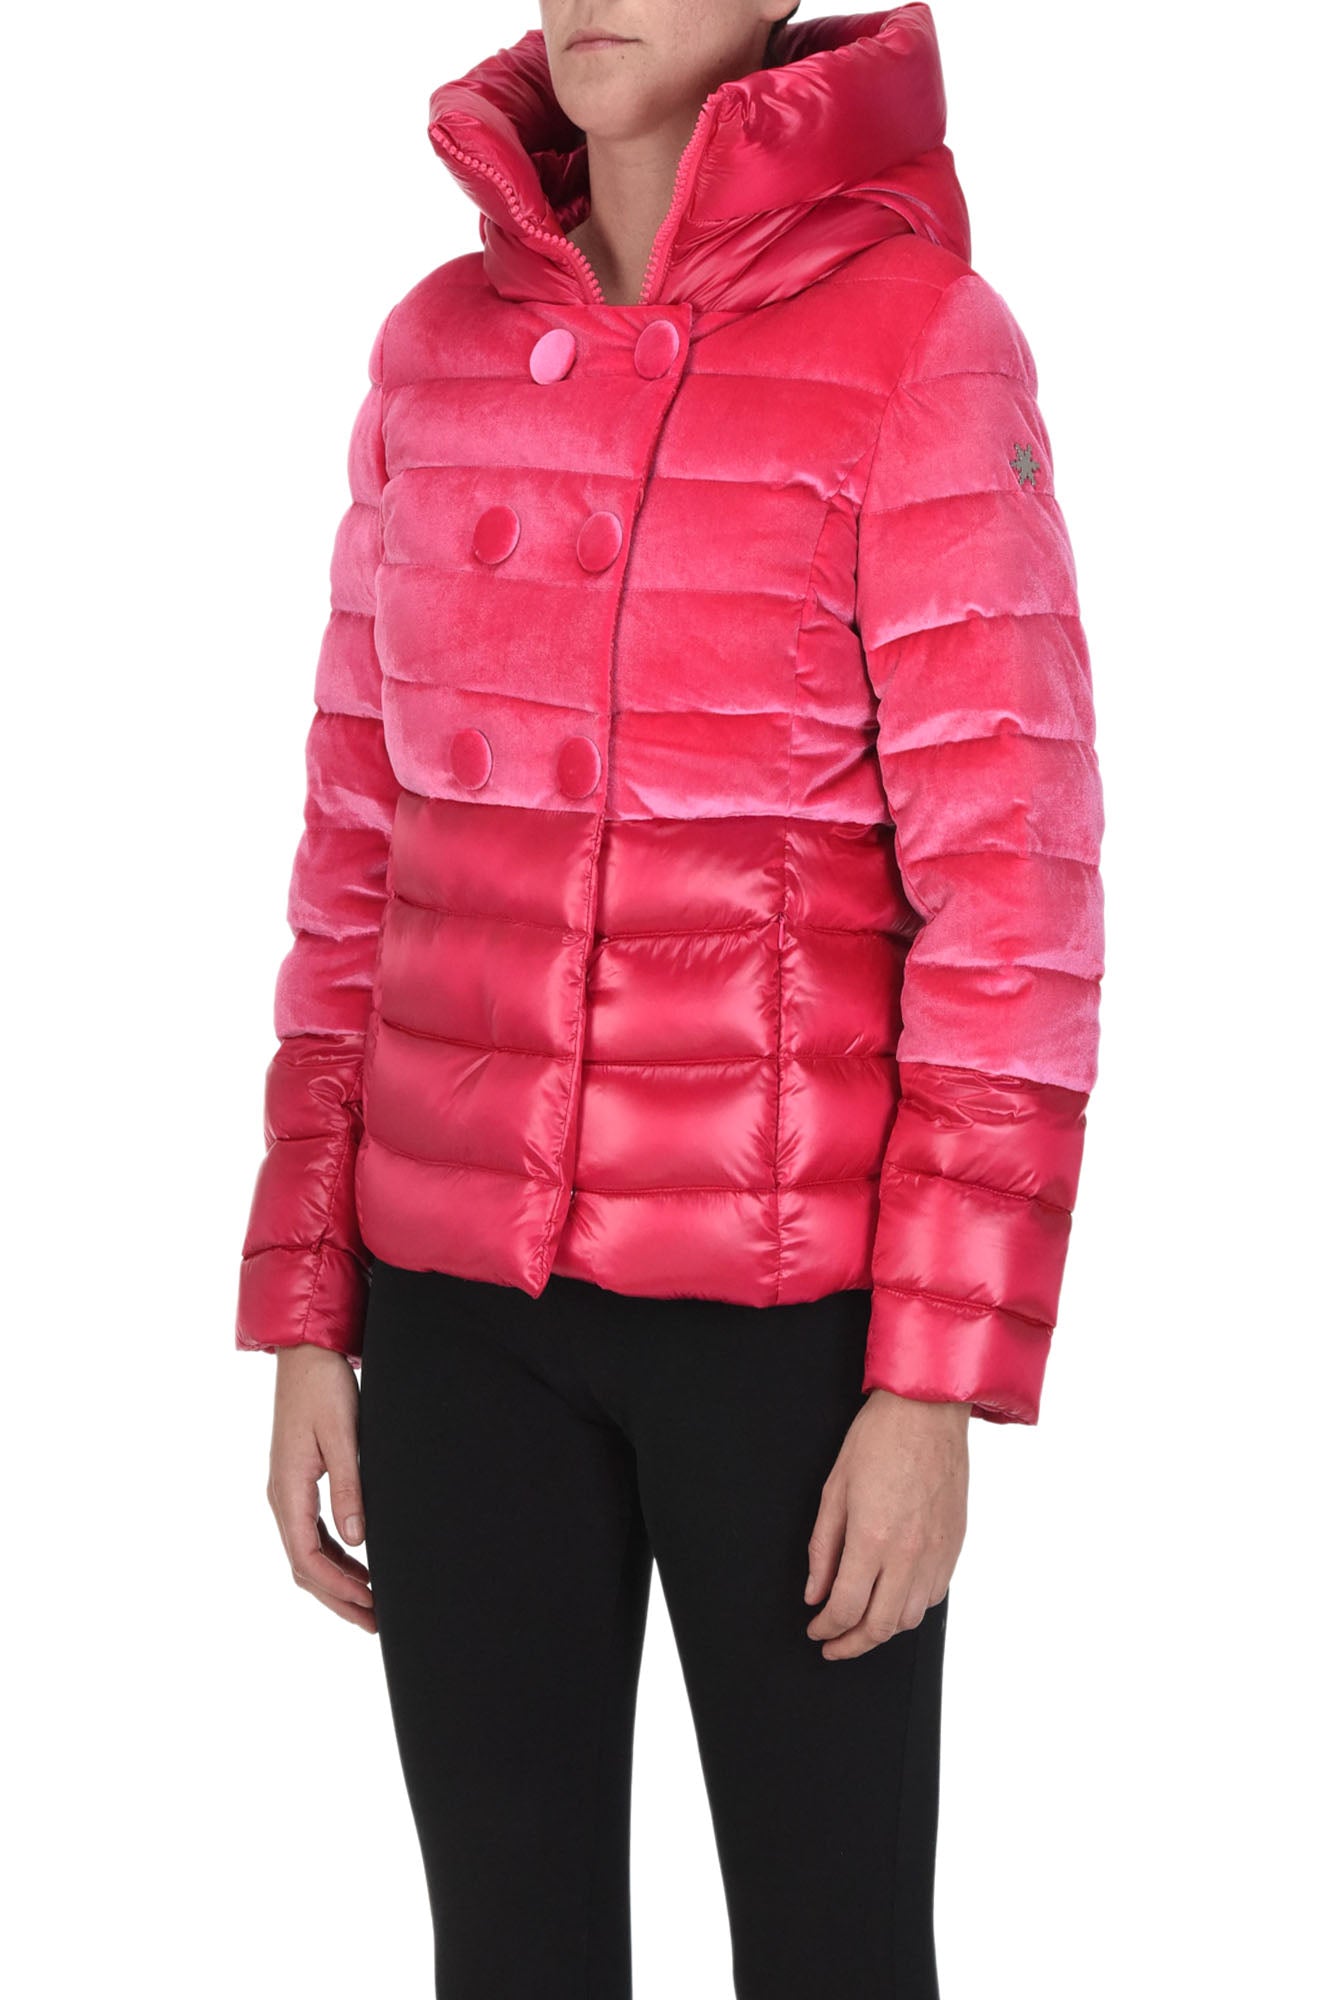 Snow Secret Women's Quilted Down Jacket